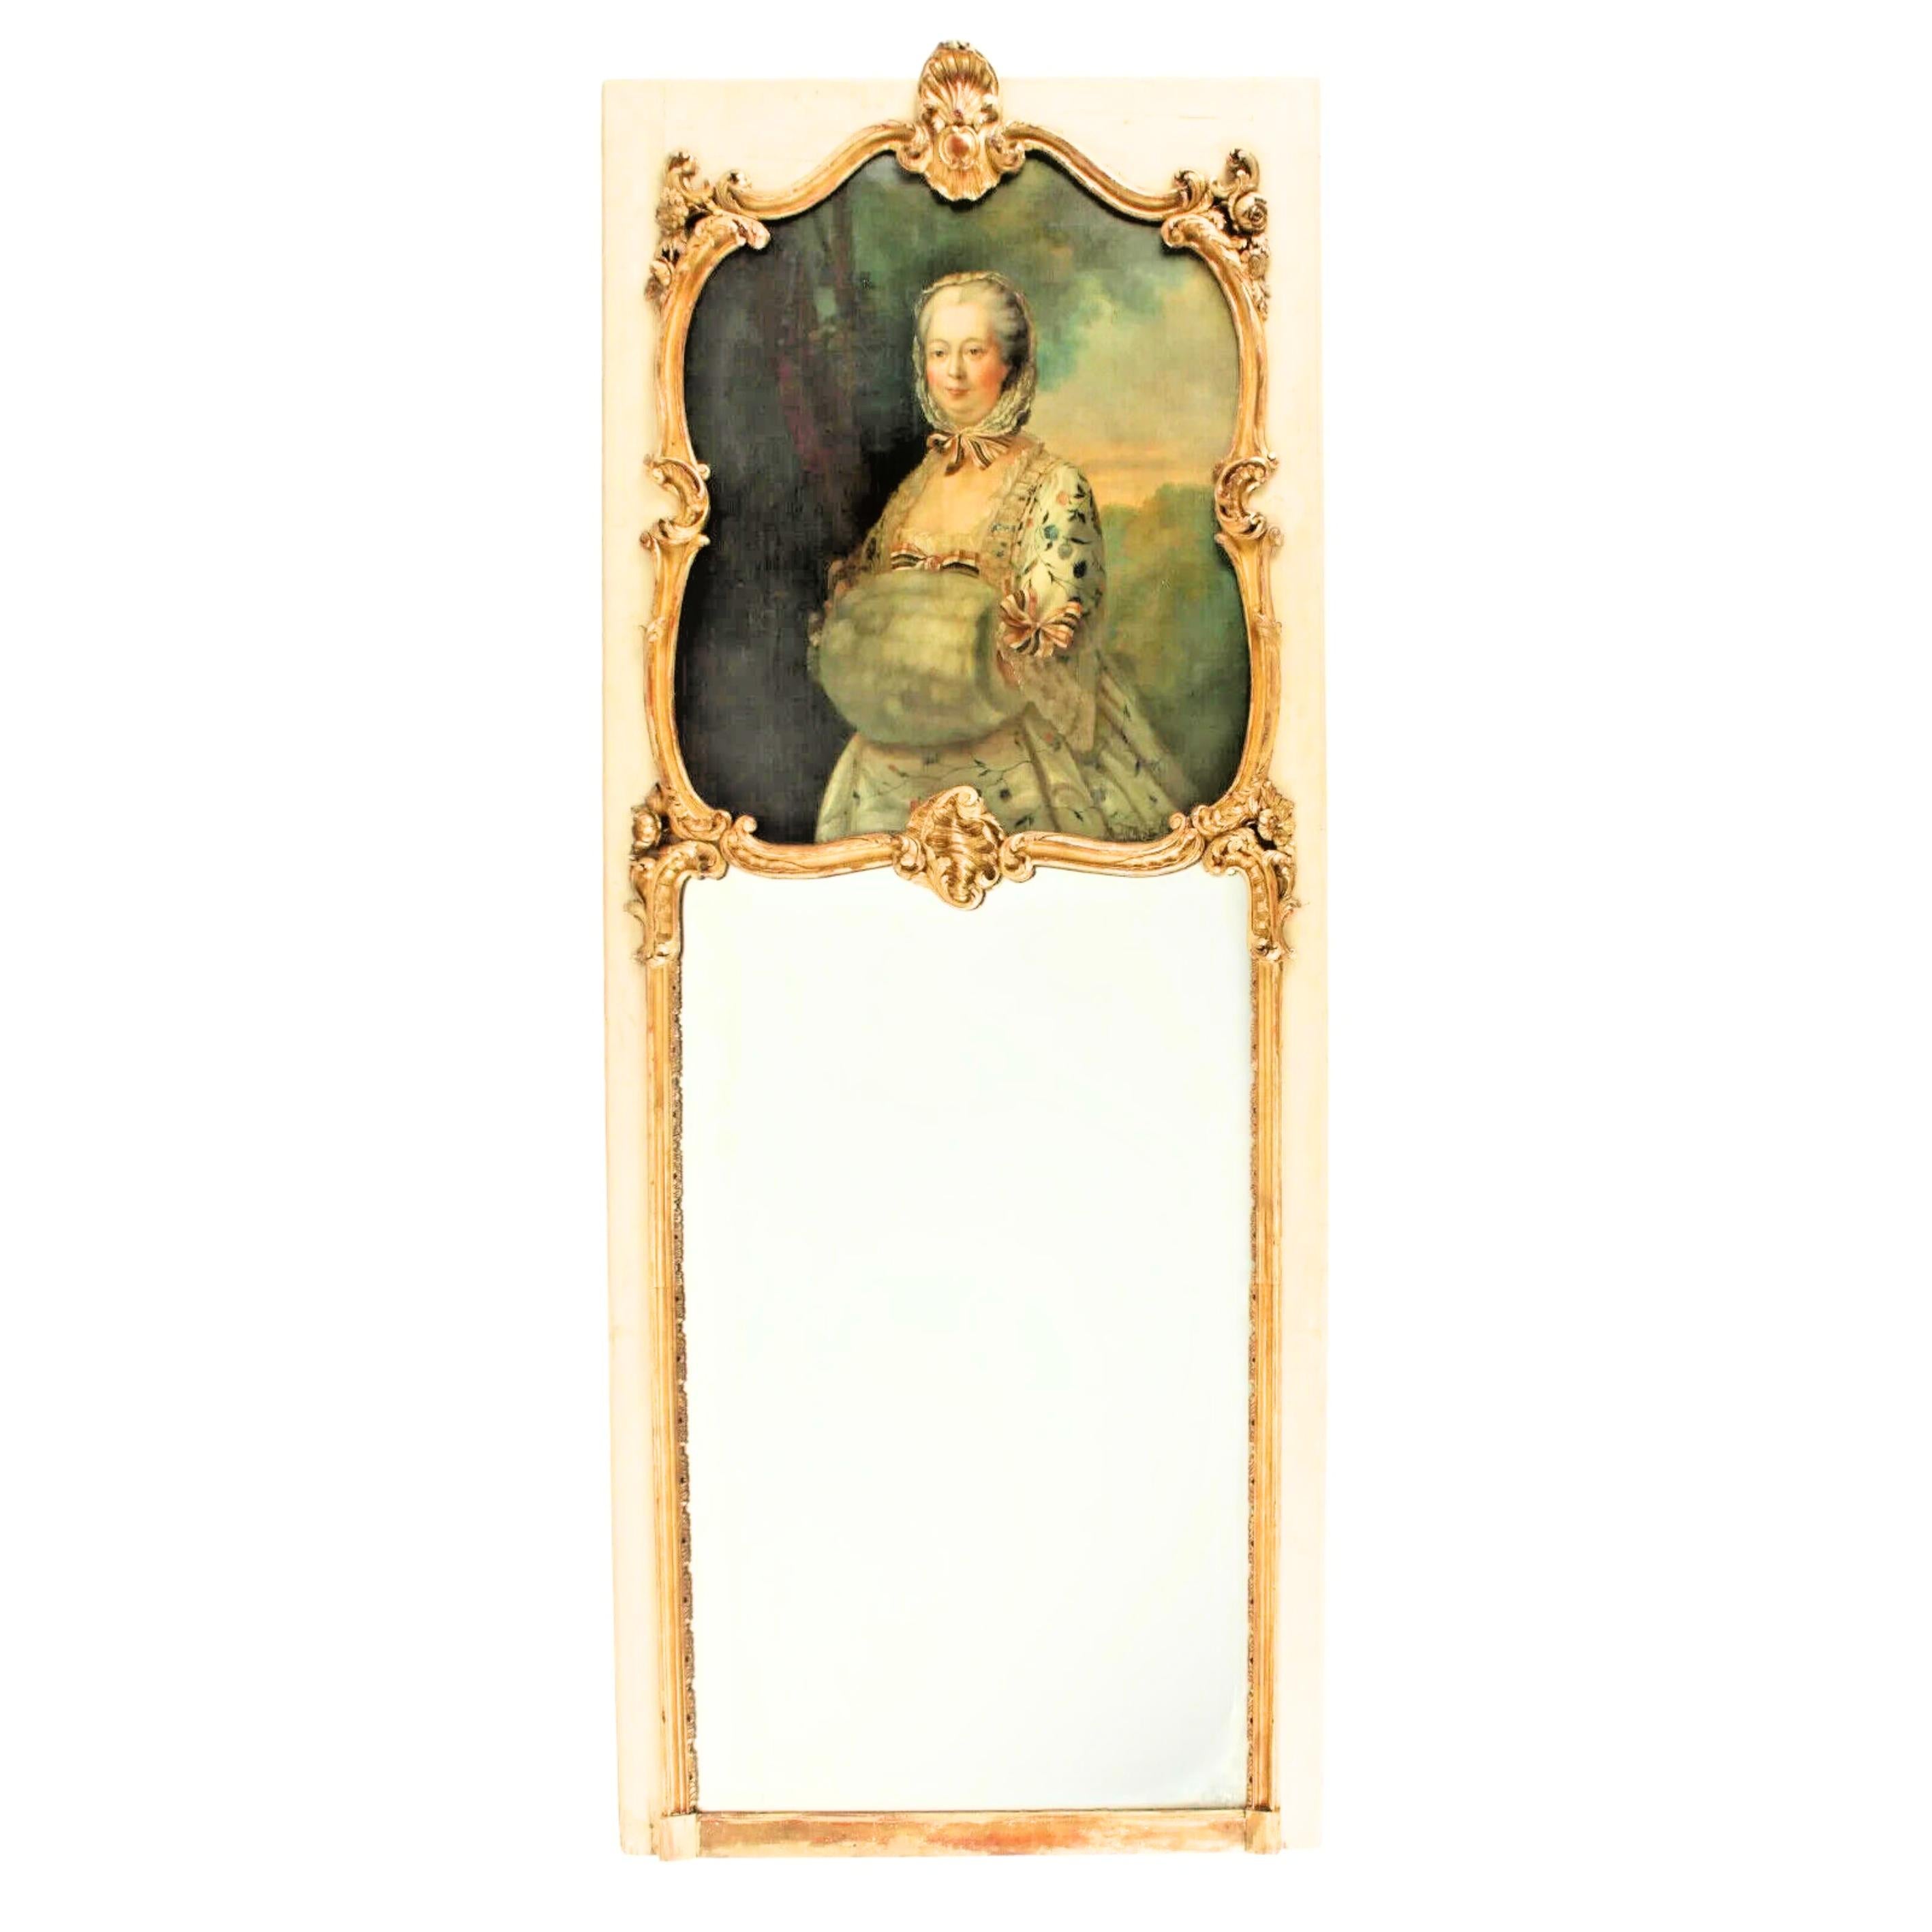 Stunning Set of Mirrors, French Parcel Gilt & Painted Trumeau, Vintage / Antique, Set of Two!!

Pair of 2 Mirrors, French Parcel Gilt & Painted Trumeau, Vintage / Antique, Set of Two!!

Exceptionally well painted pair 0f Mirrors, (2) Exceptional